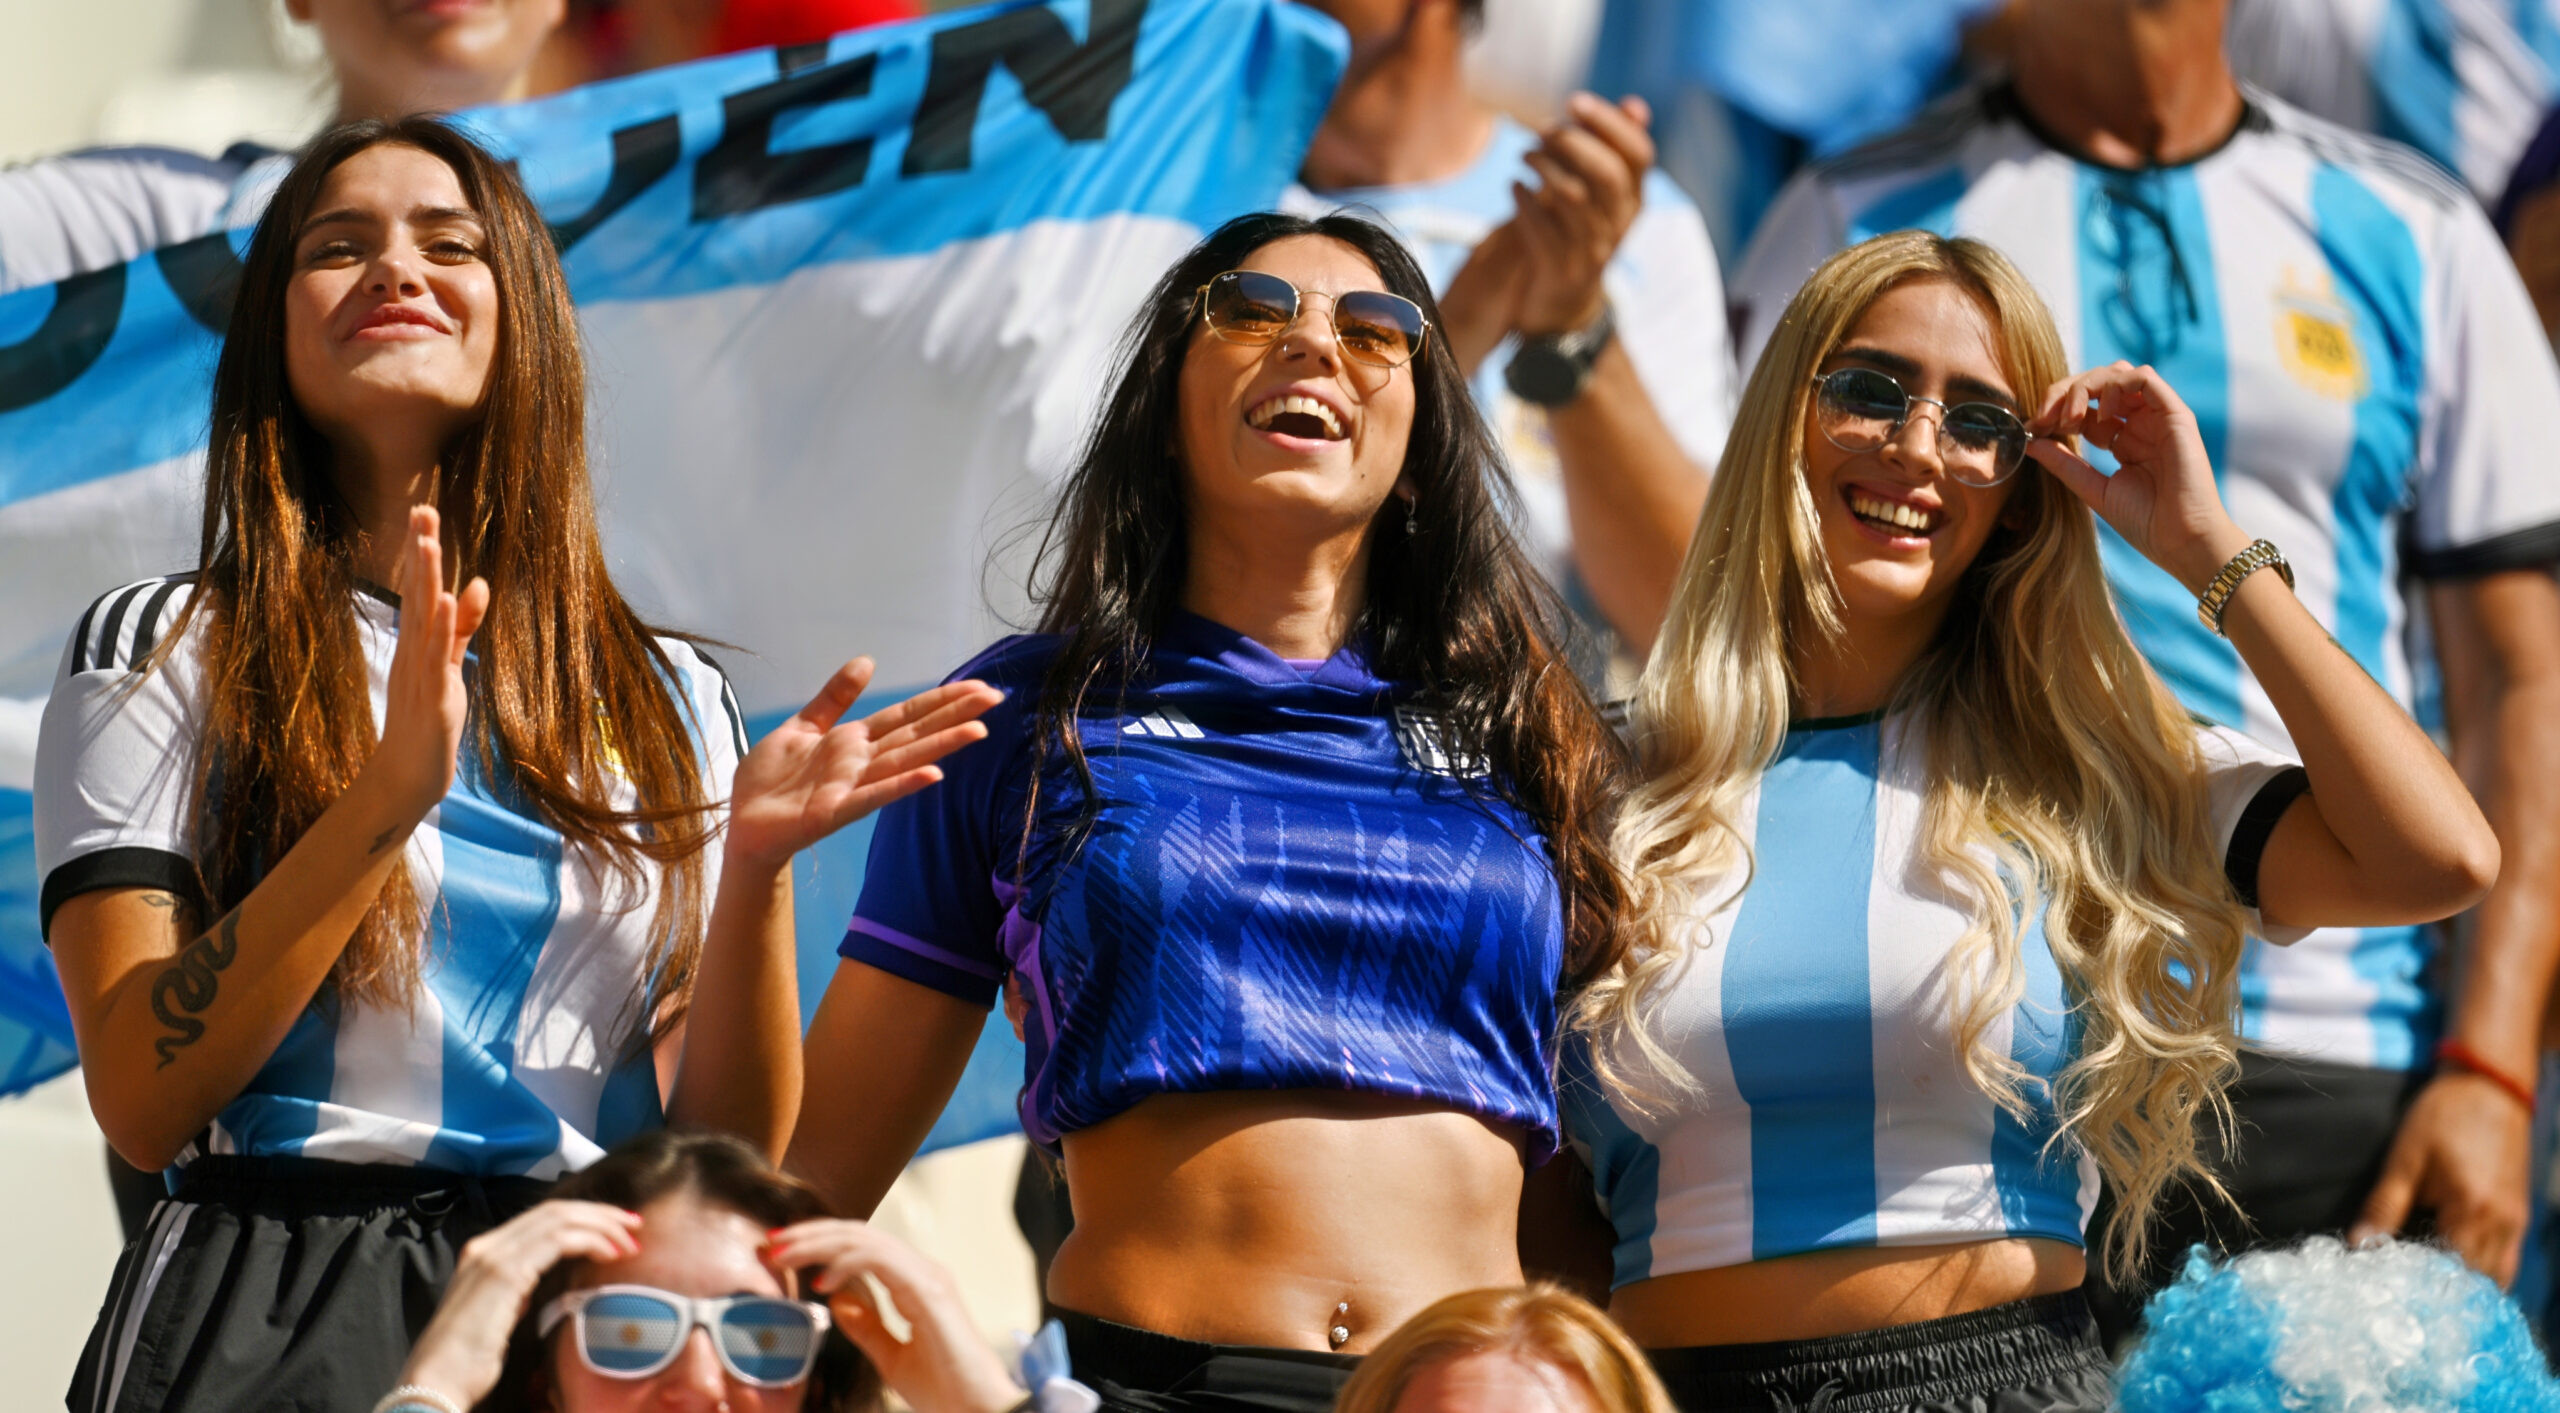 Female Argentina Fan Celebrating Topless In The Stands After World Cup Victory 1134